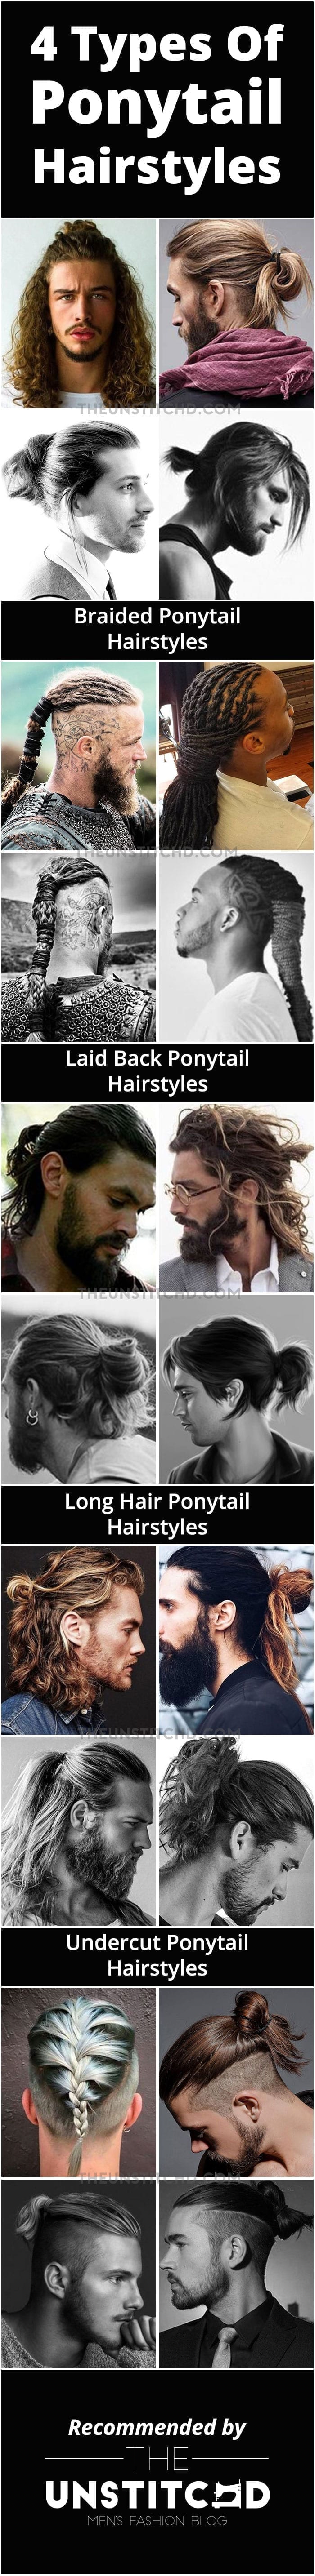 Ponytail-Hairstyle